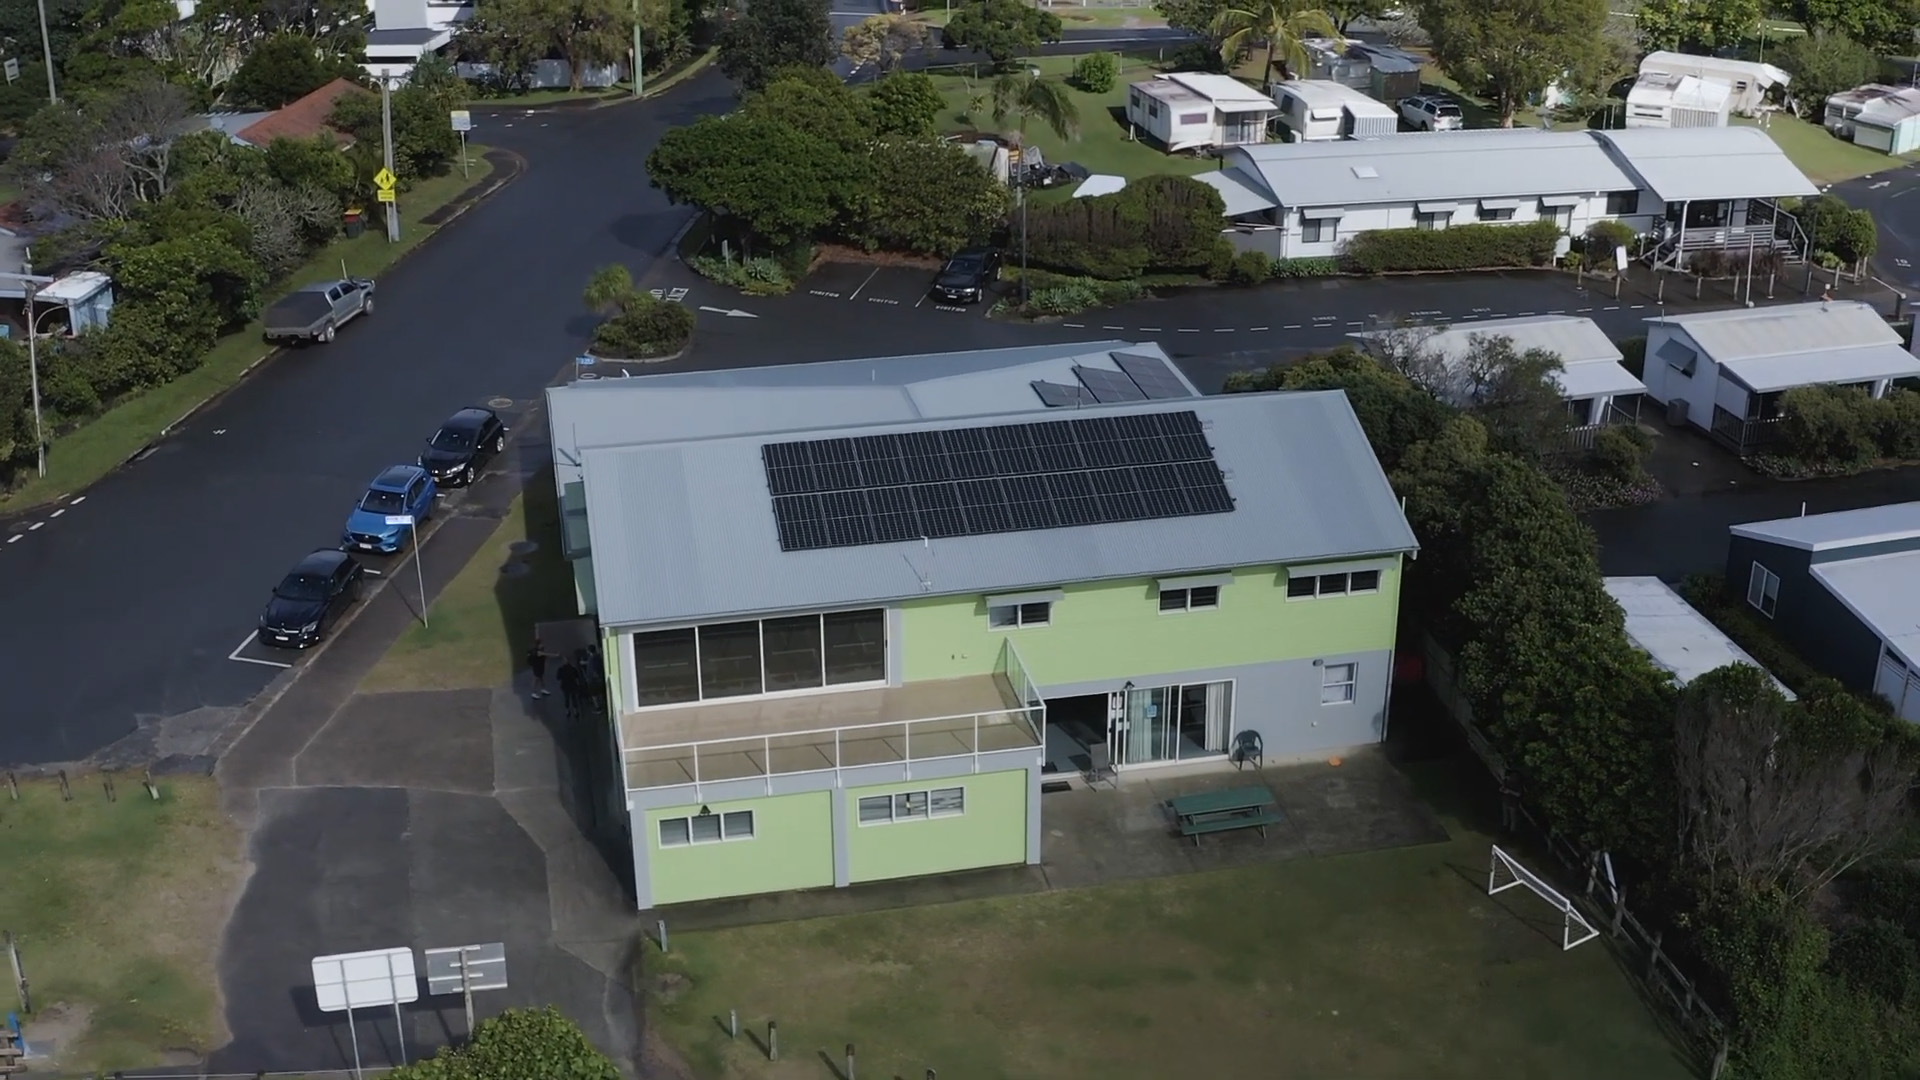 Aerial view of a community building with solar panels on it.